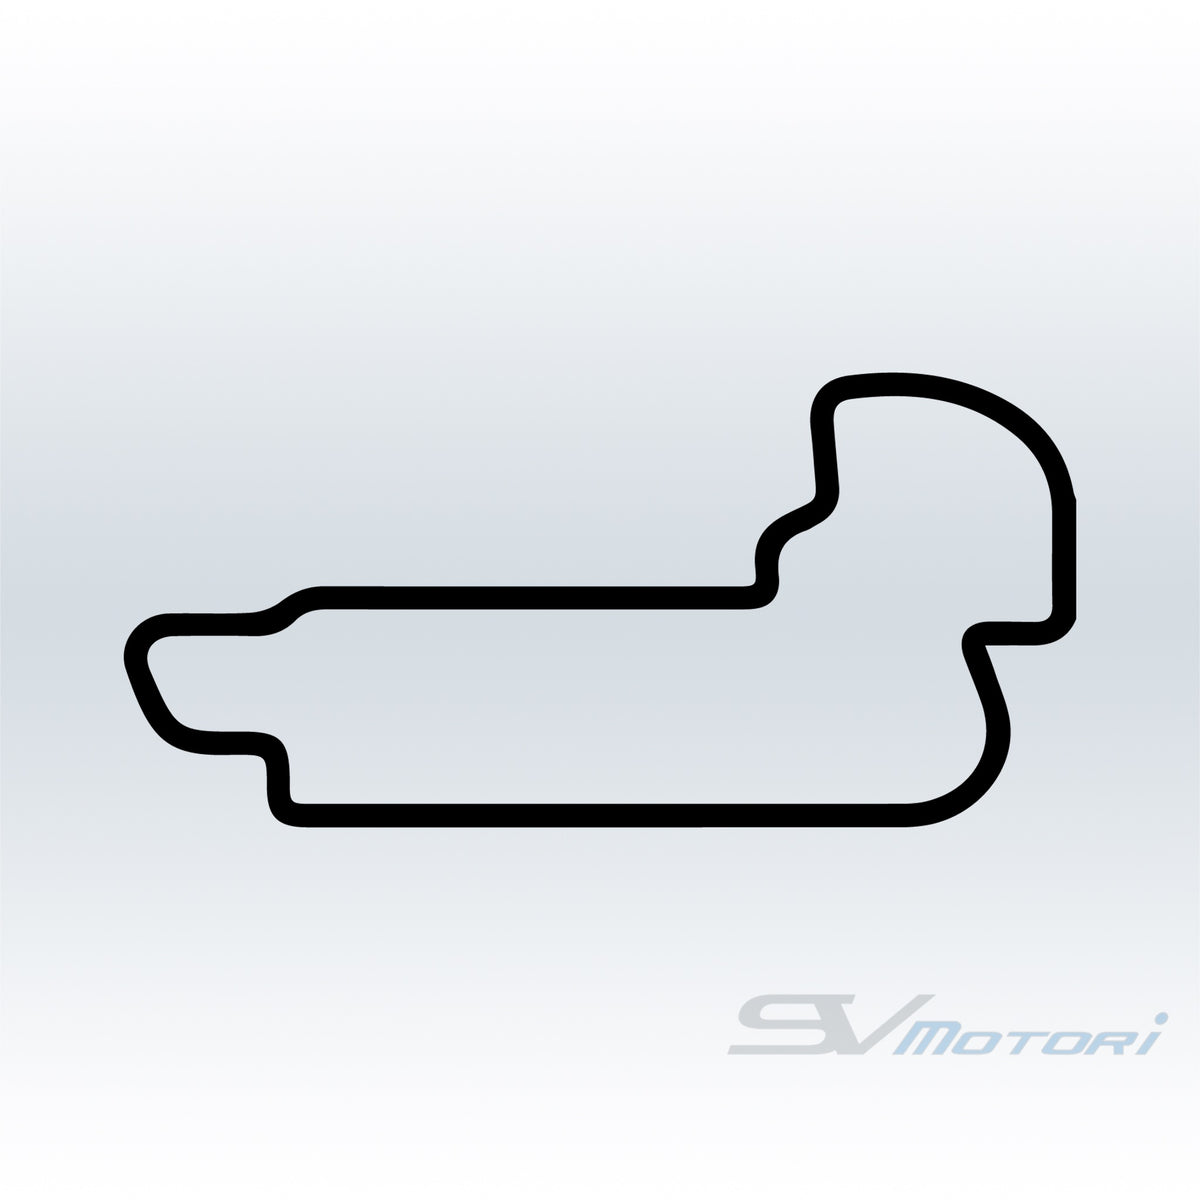 BMW Performance Center Indianapolis Motor Speedway Outline Decal